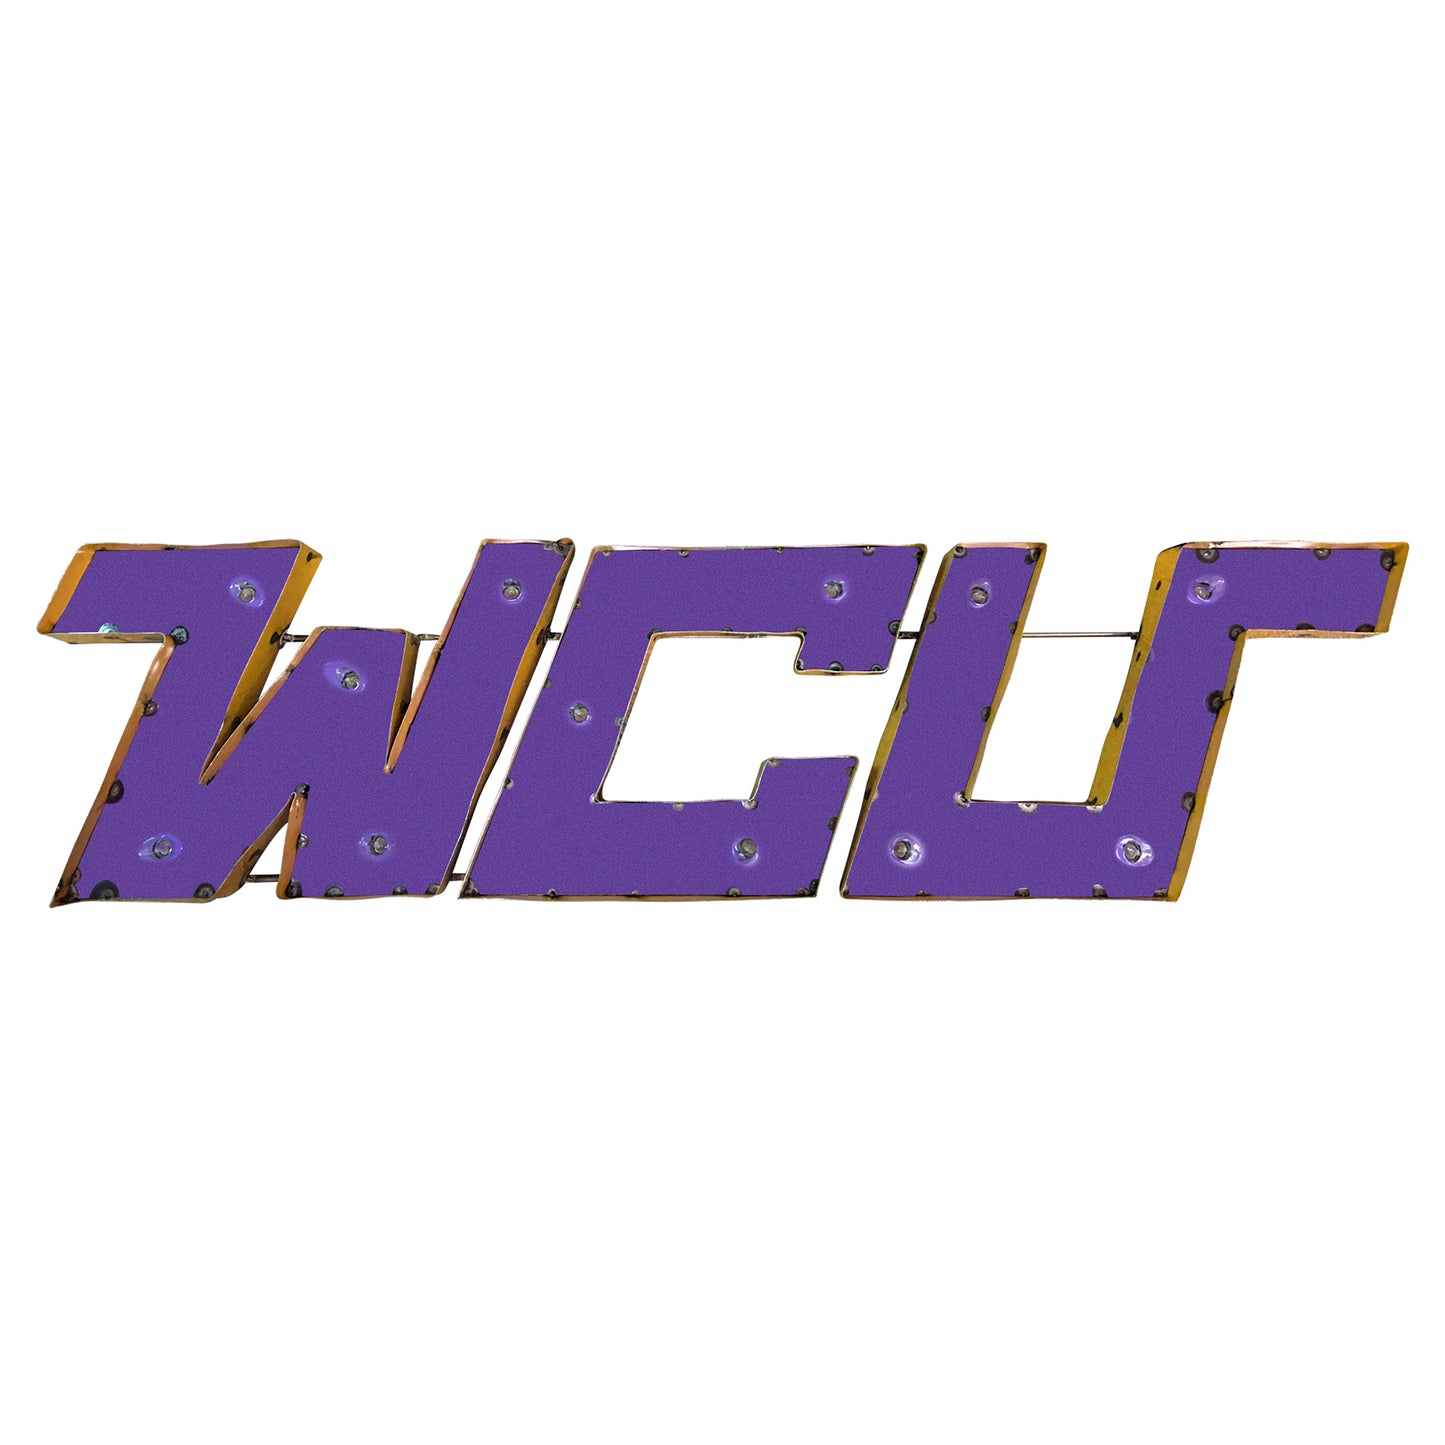 West Chester University "WCU" Lighted Recycled Metal Wall Decor